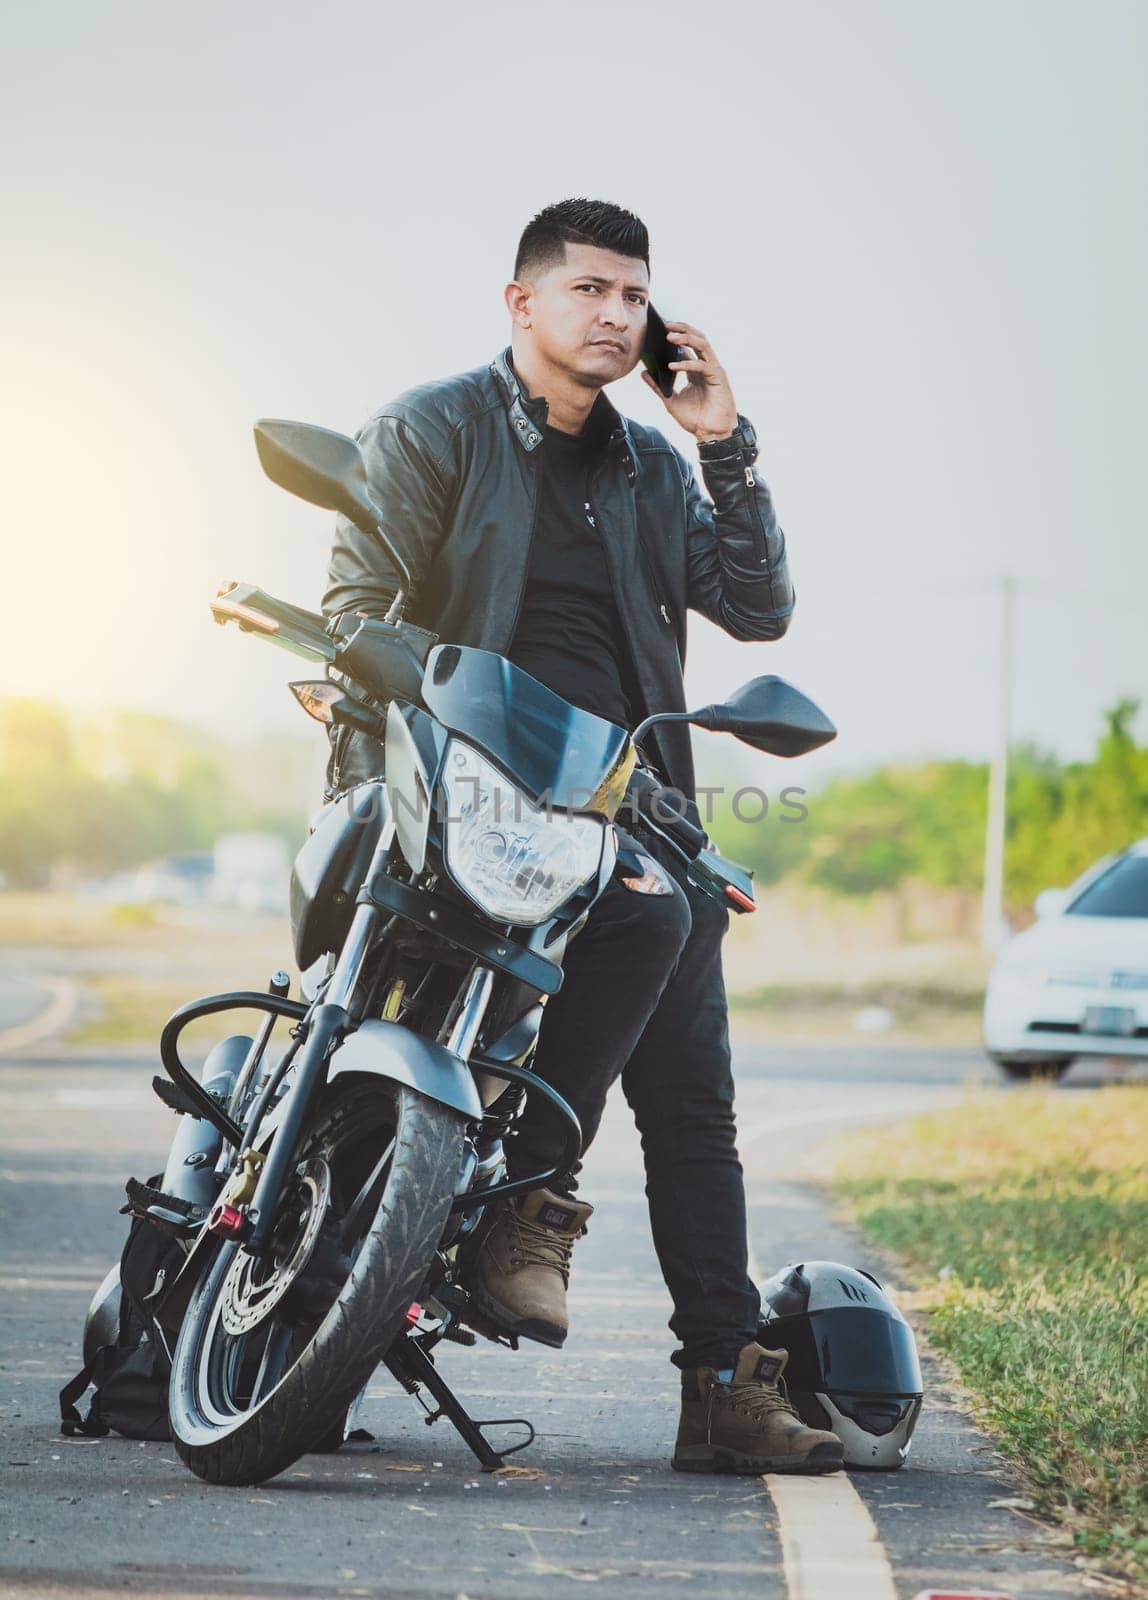 Handsome biker calling on the phone in the street. Biker sitting on motorcycle calling on the phone on the roadside. Concept of motorcyclist using the phone by isaiphoto